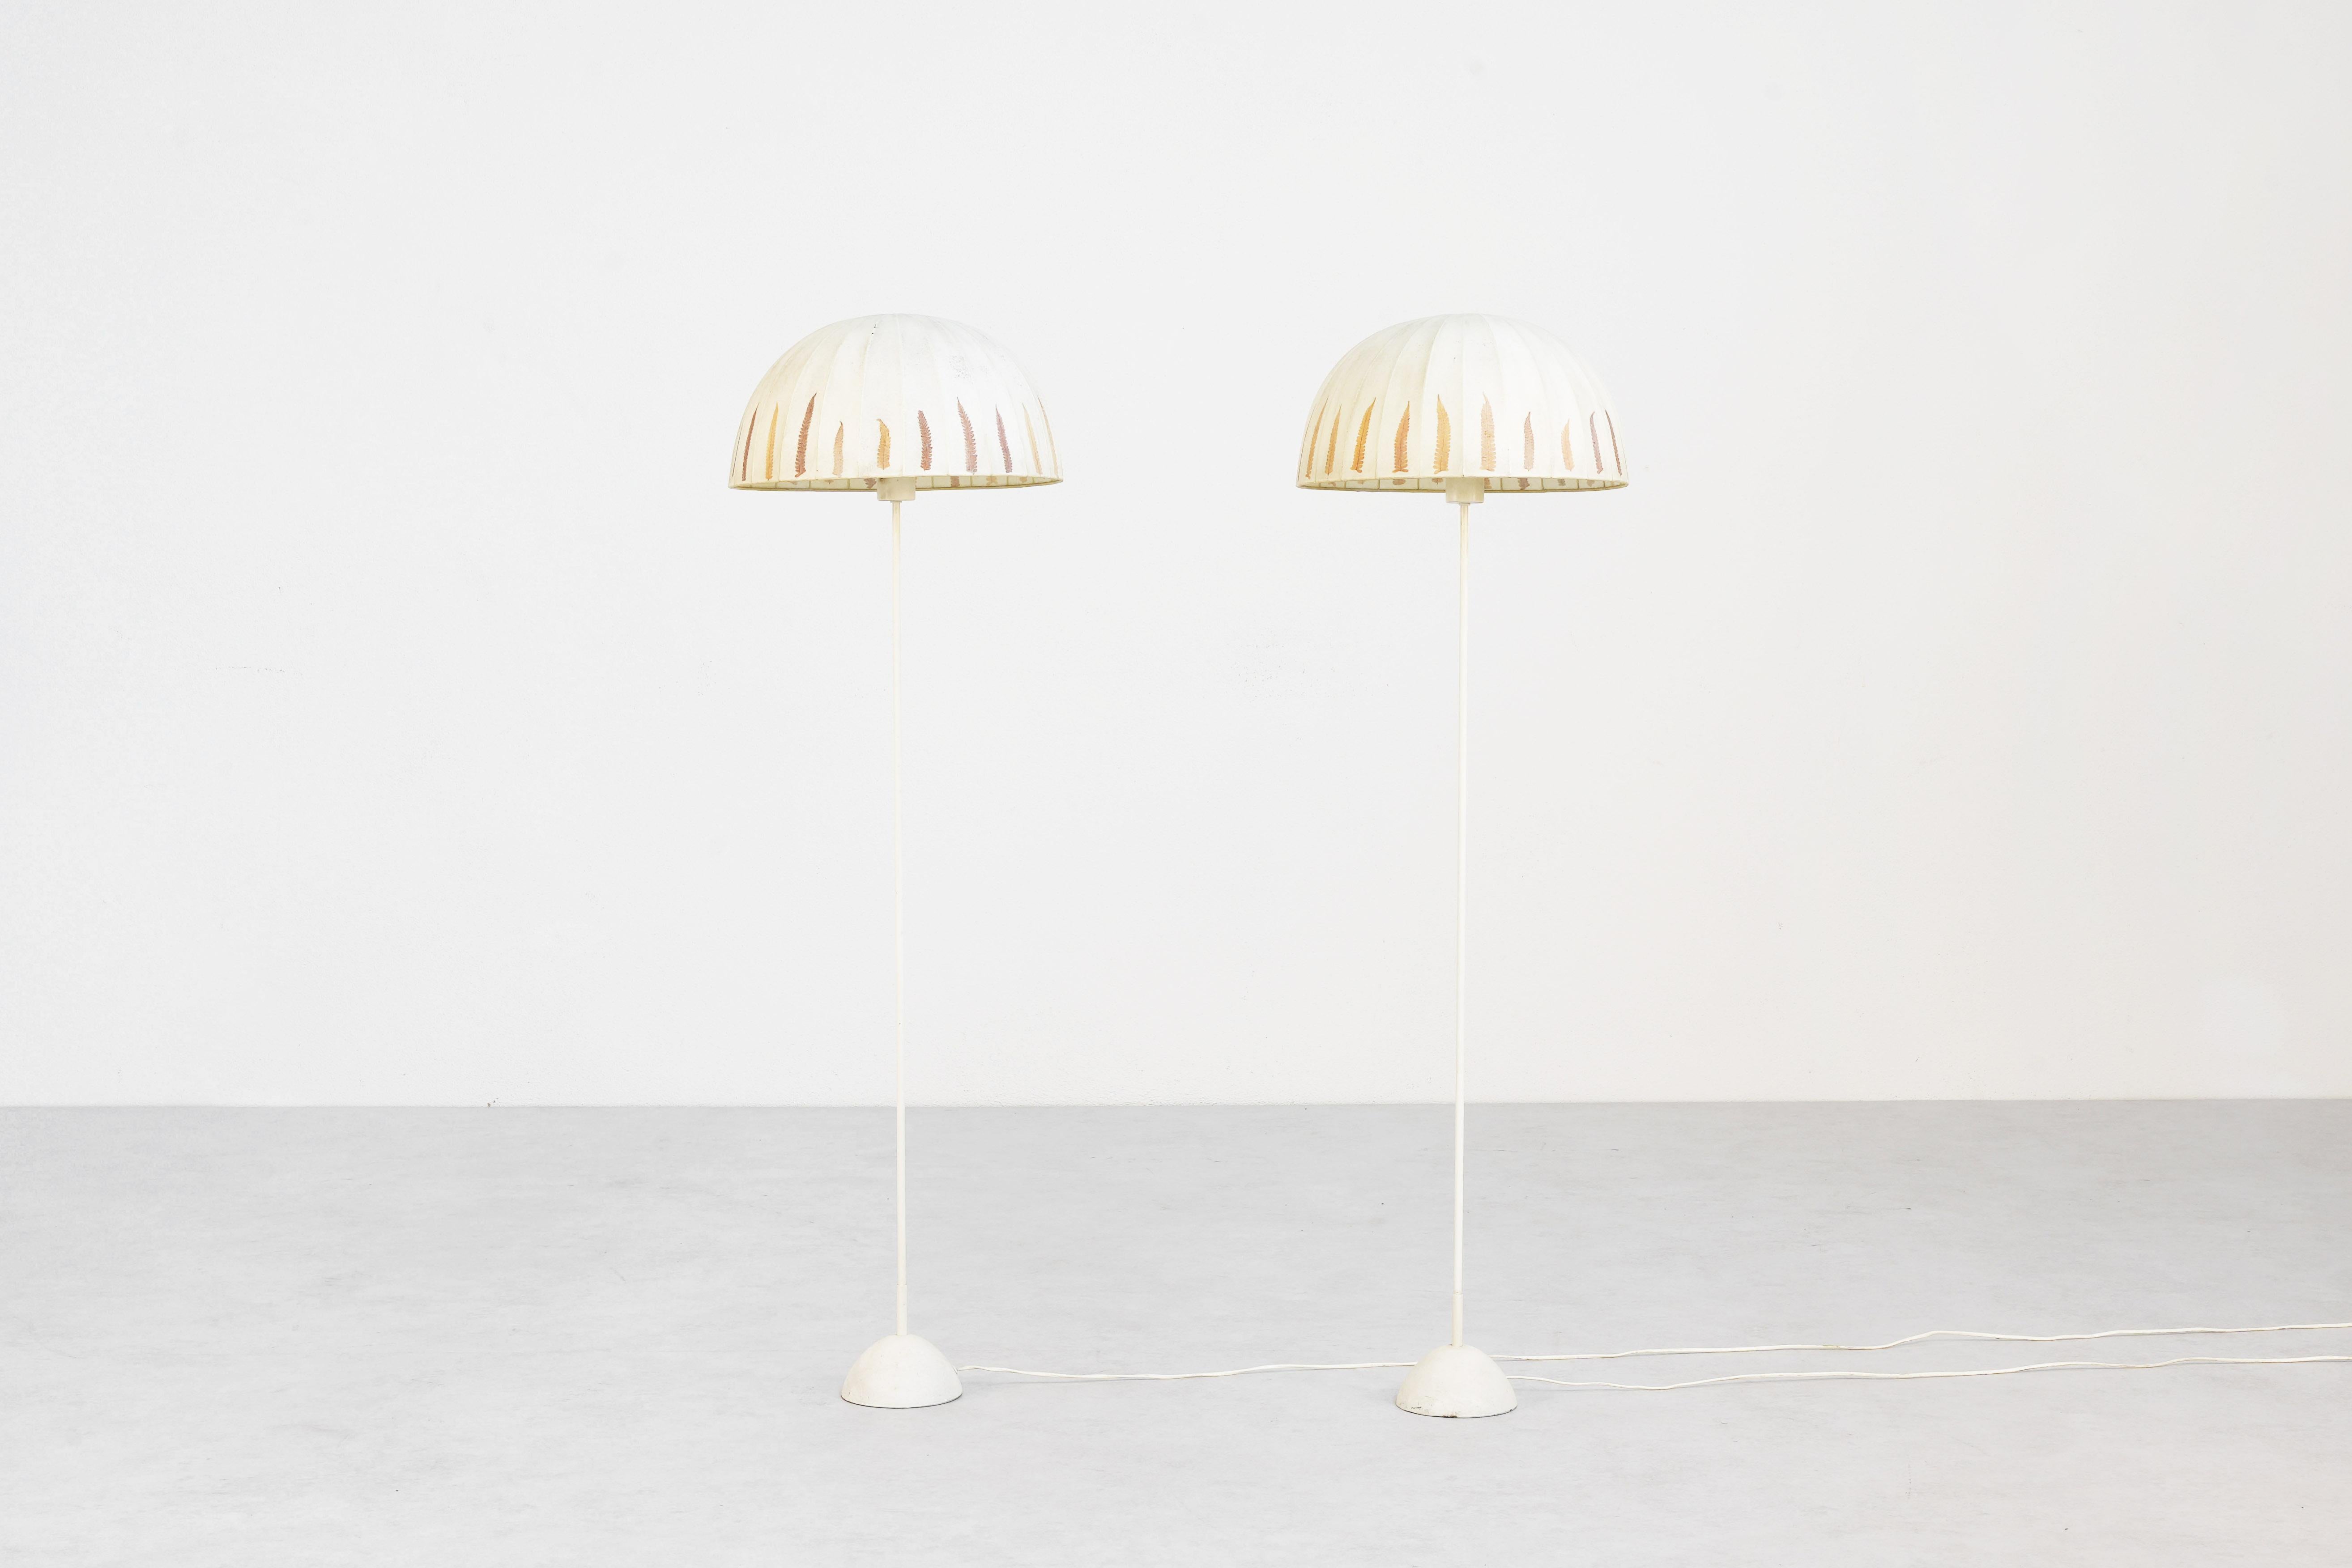 A beautiful pair of rare floor lamps designed by Hans-Agne Jakobsson in the 1960s and manufactured by Markaryd in Sweden. Both lamps are in good condition with minor signs of use and age, and everything remains in its original condition. The shades